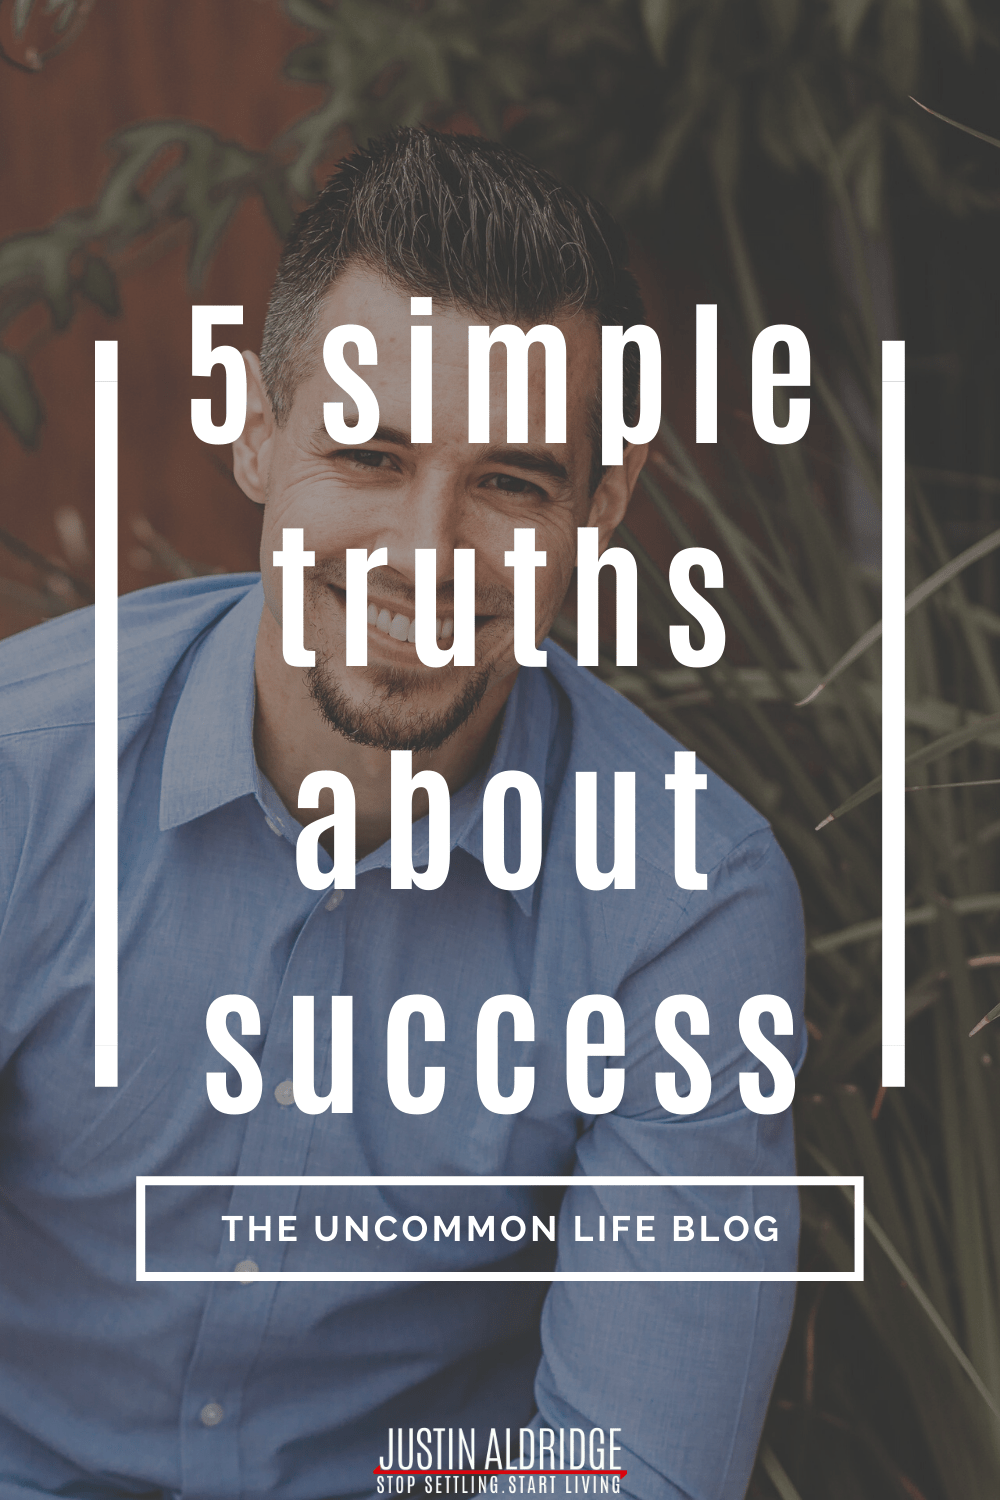 Man smiling in background behind the text, "5 simple truths about success" in white font